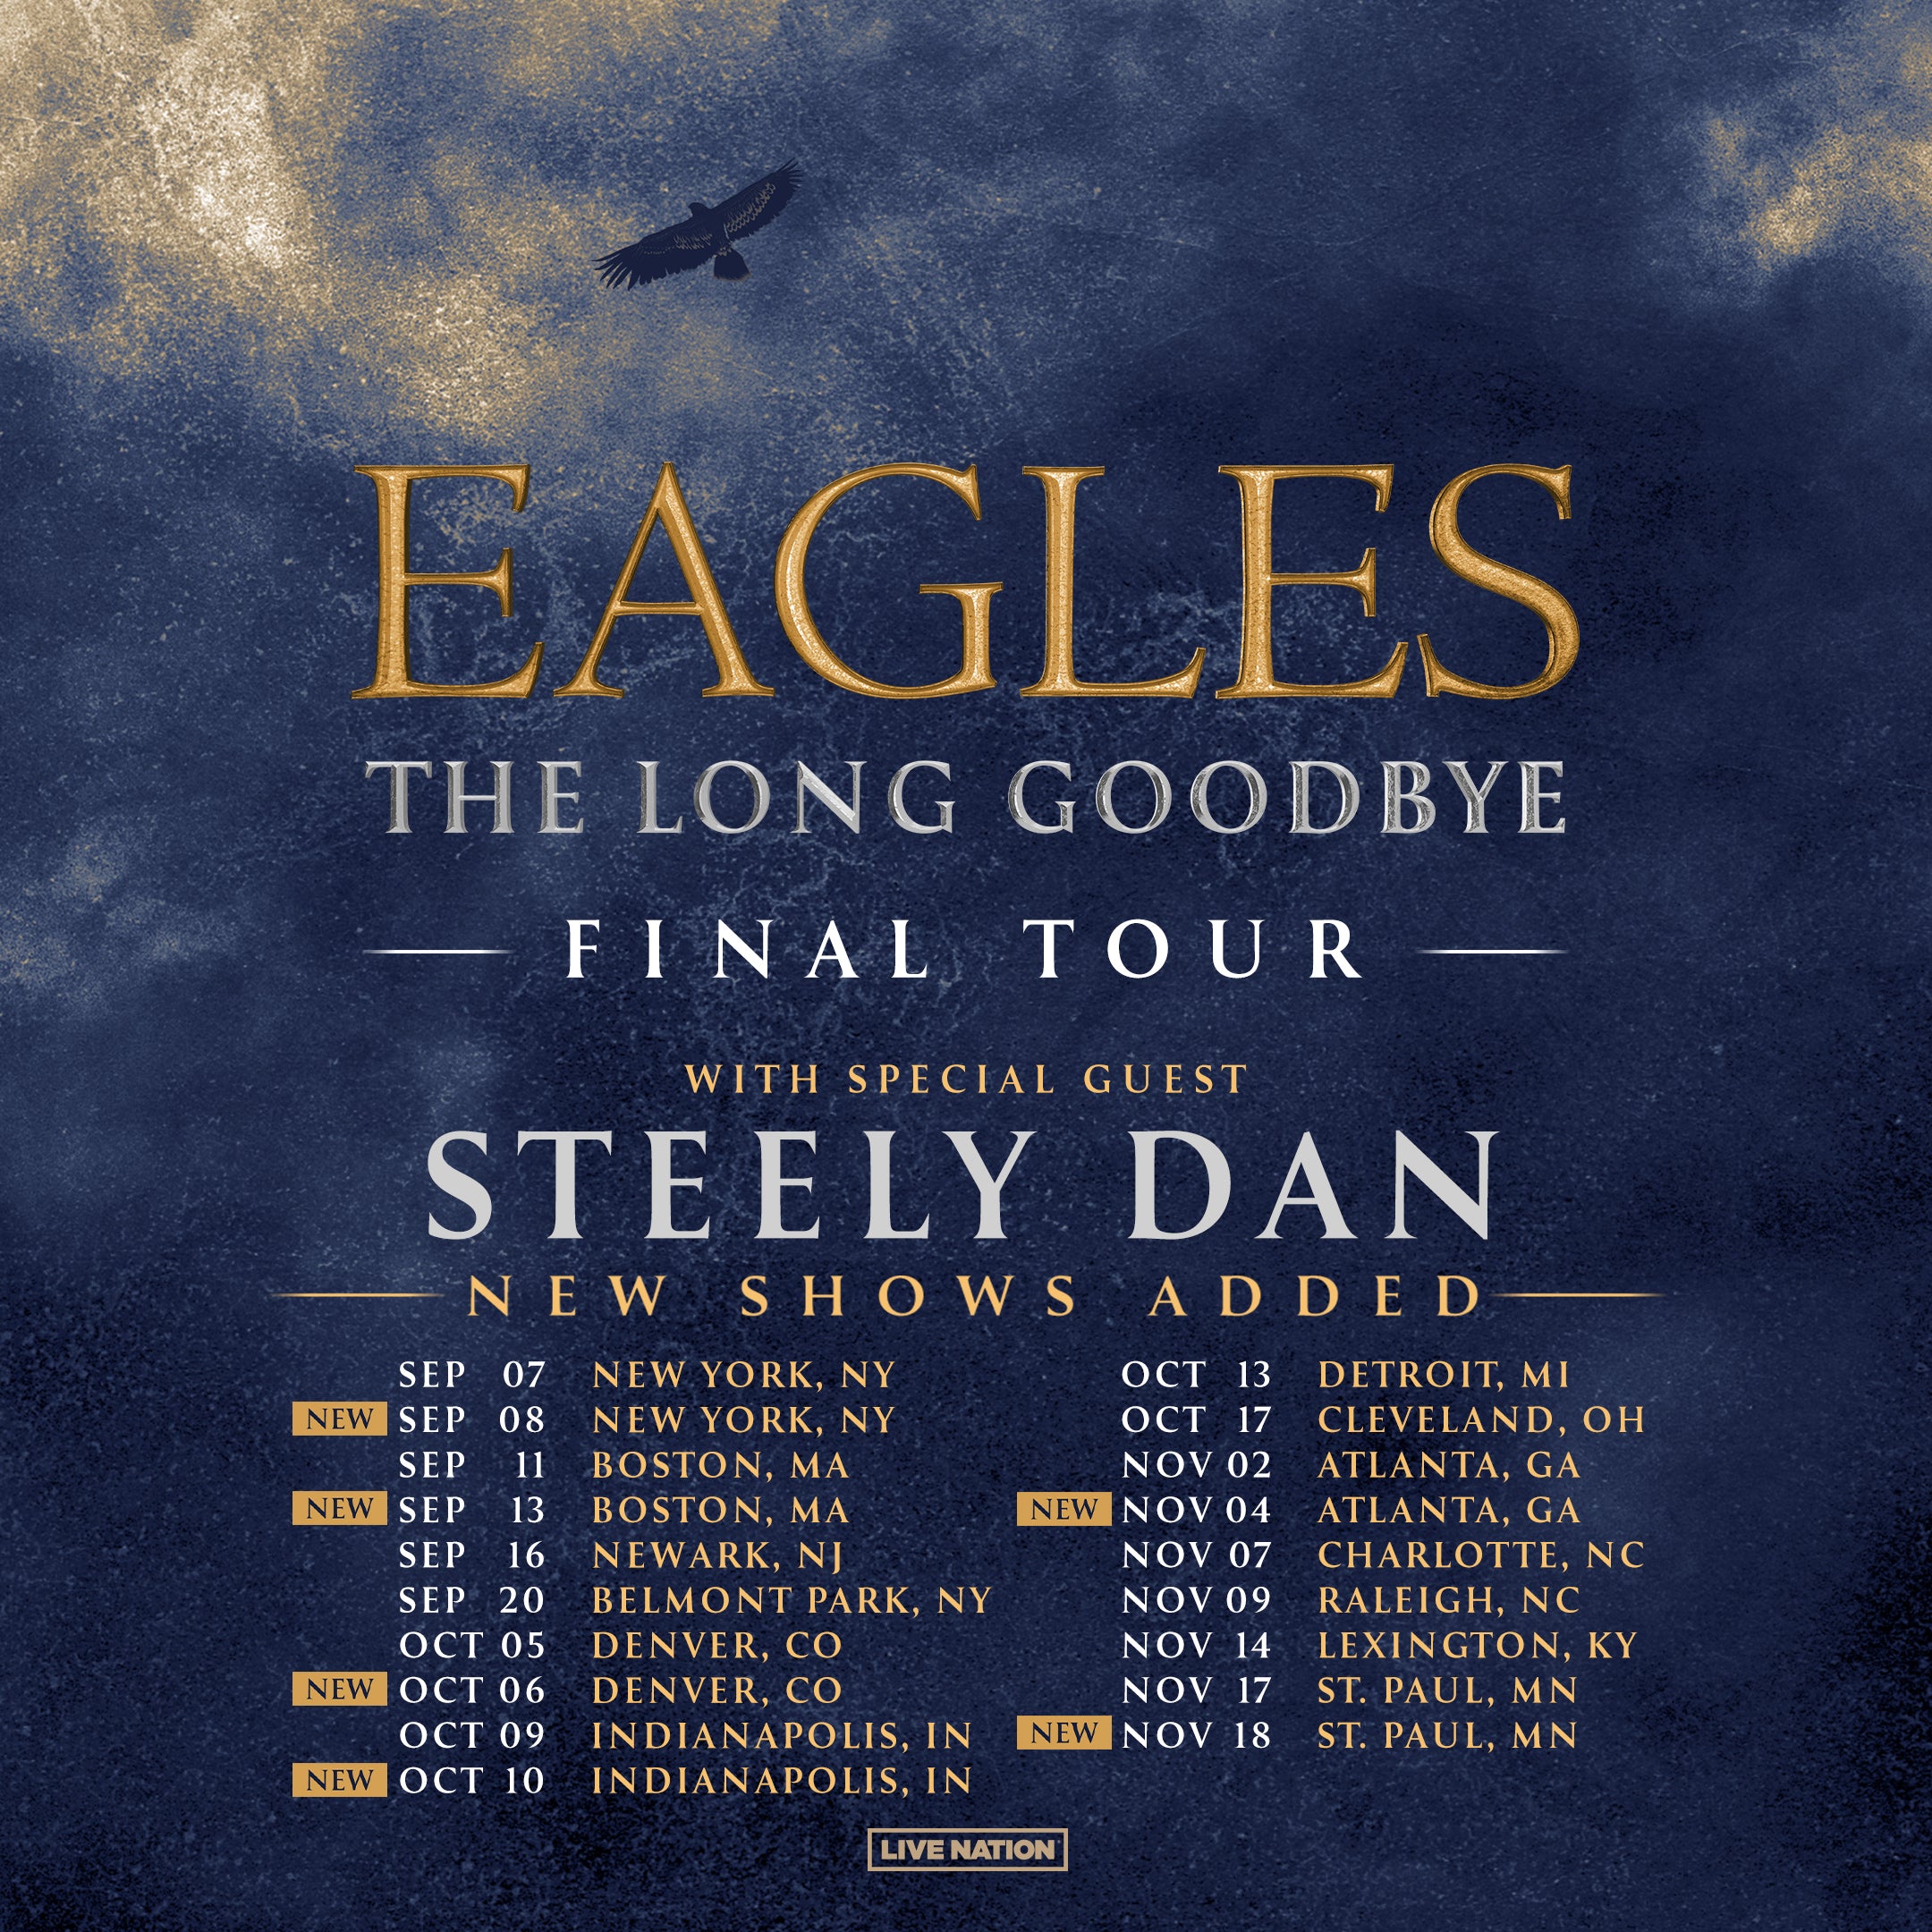 New Dates Added to "The Long Goodbye" Tour Don Henley